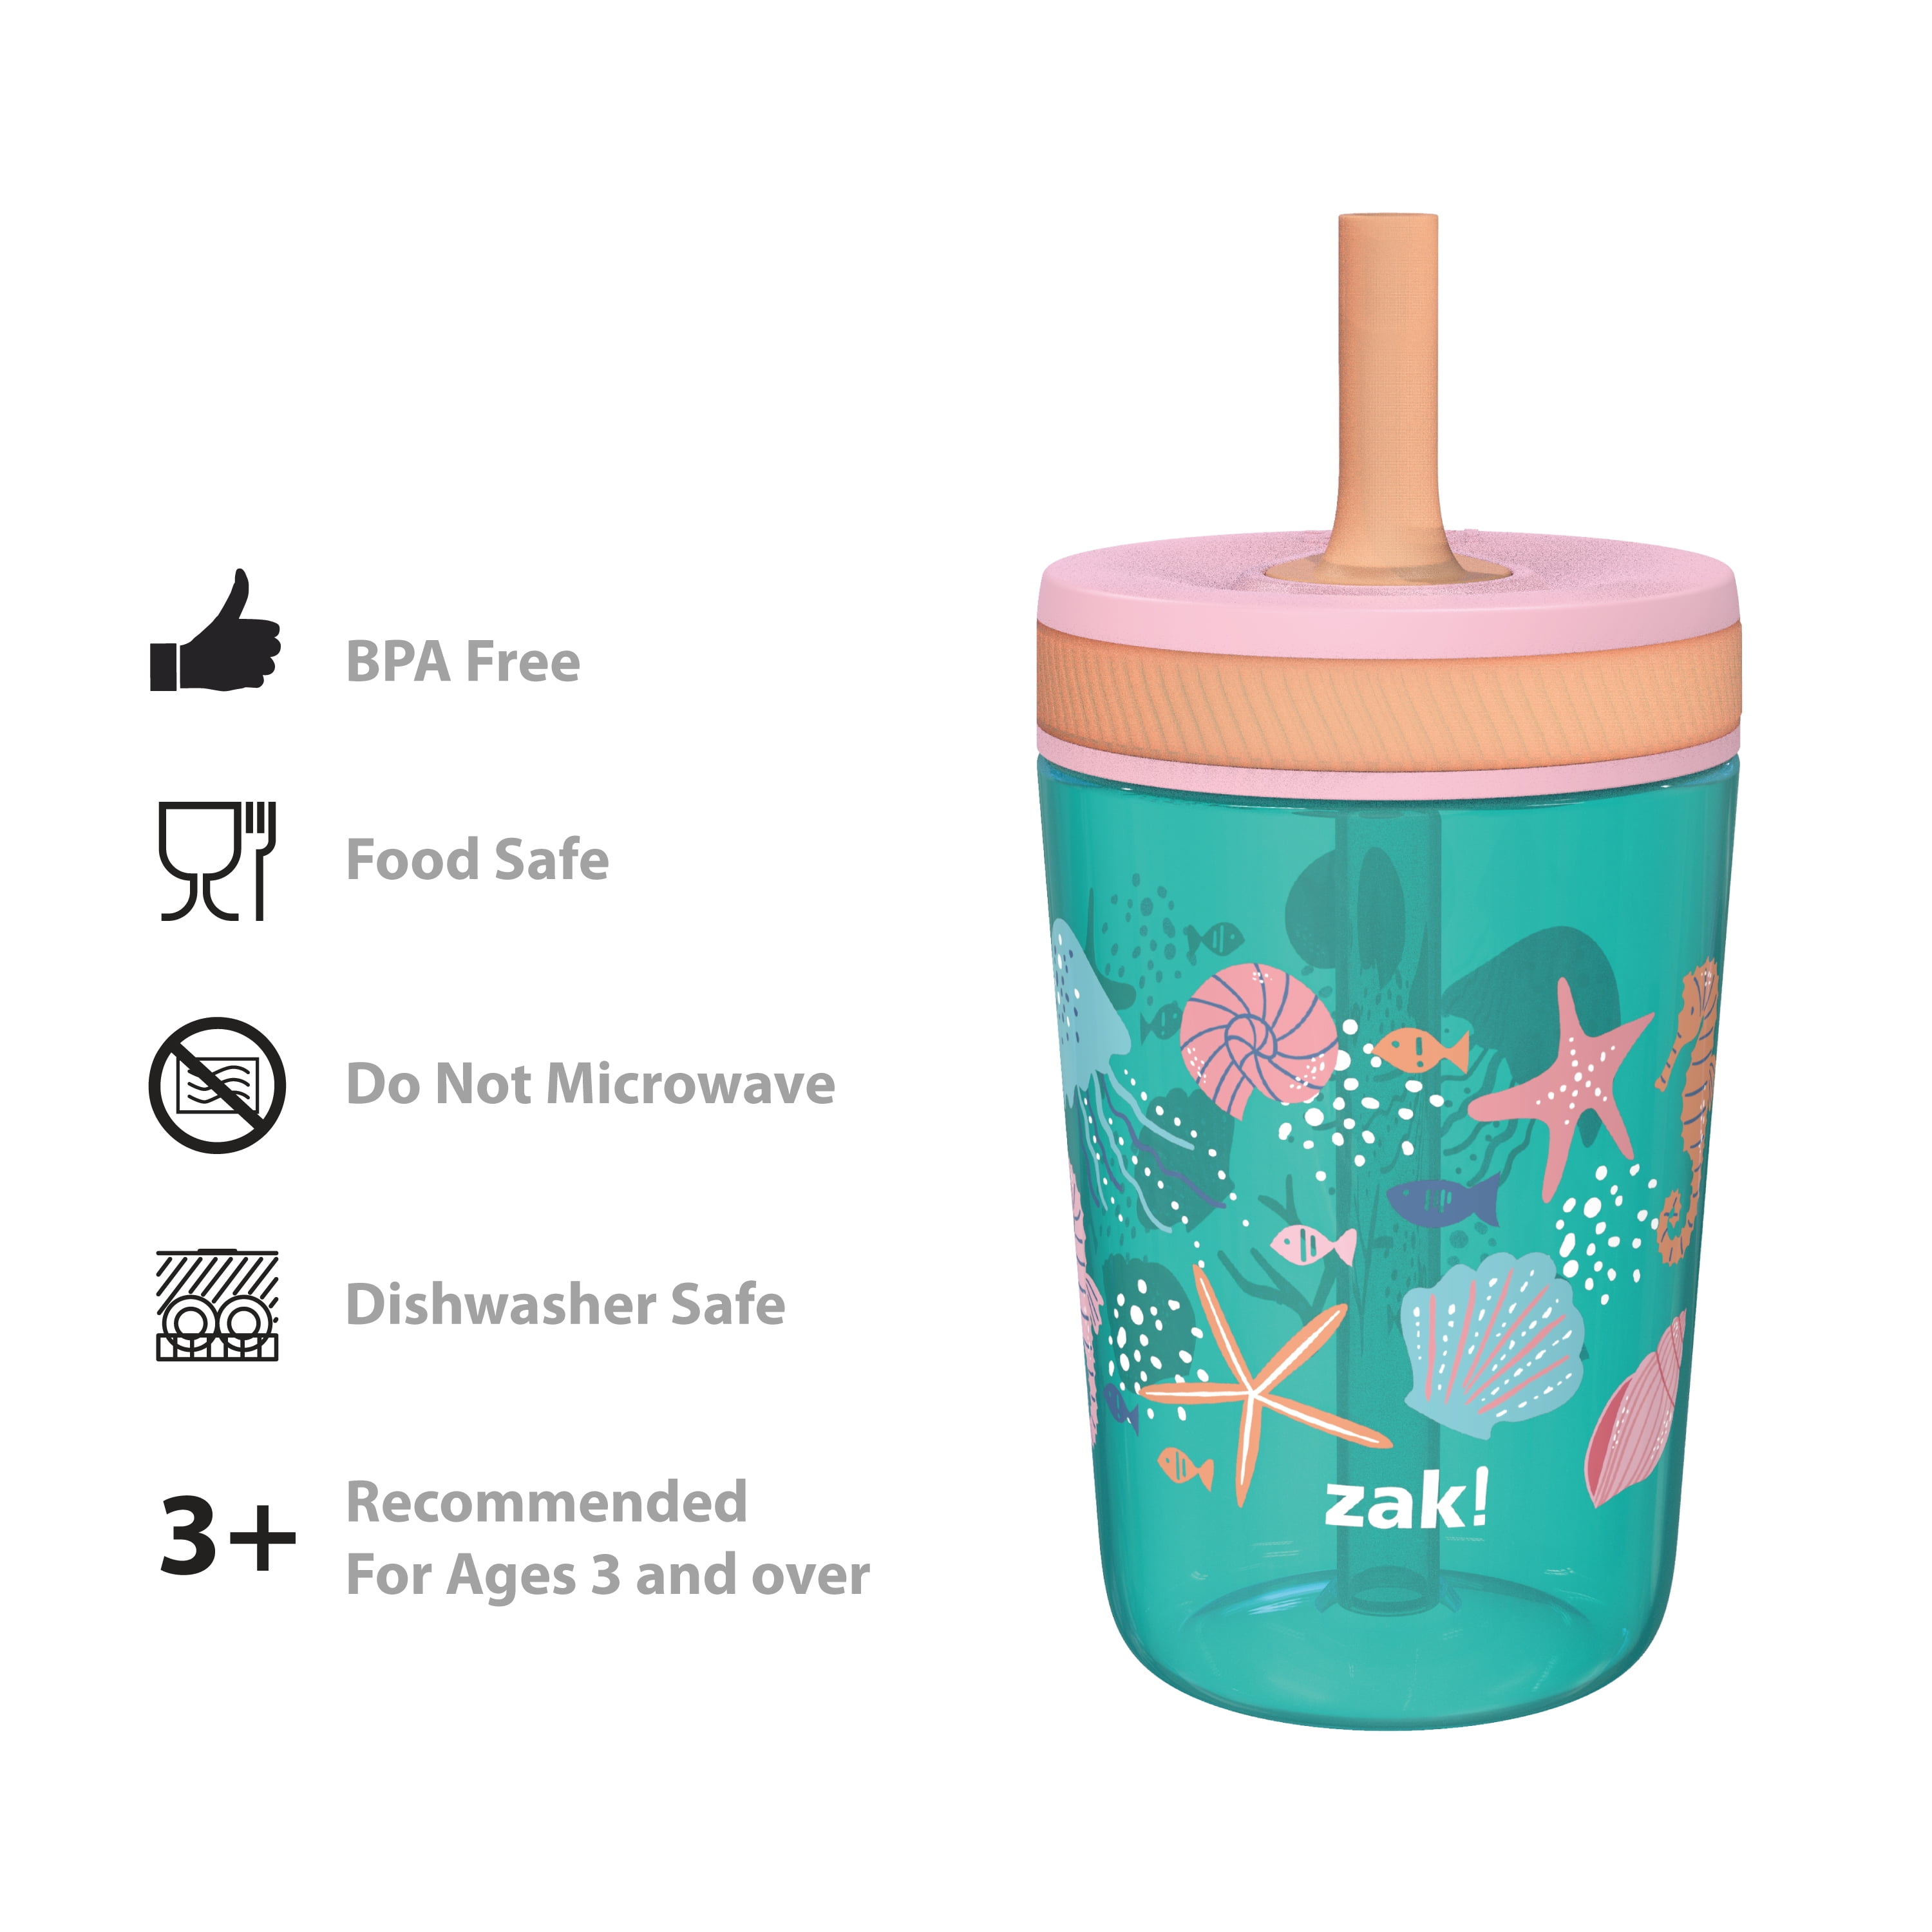 Zak Designs 15 oz Travel Straw Tumbler Plastic and Silicone with Leak-Proof Straw Valve for Kids, 2-Pack Shells, Size: 15 fl oz, Green